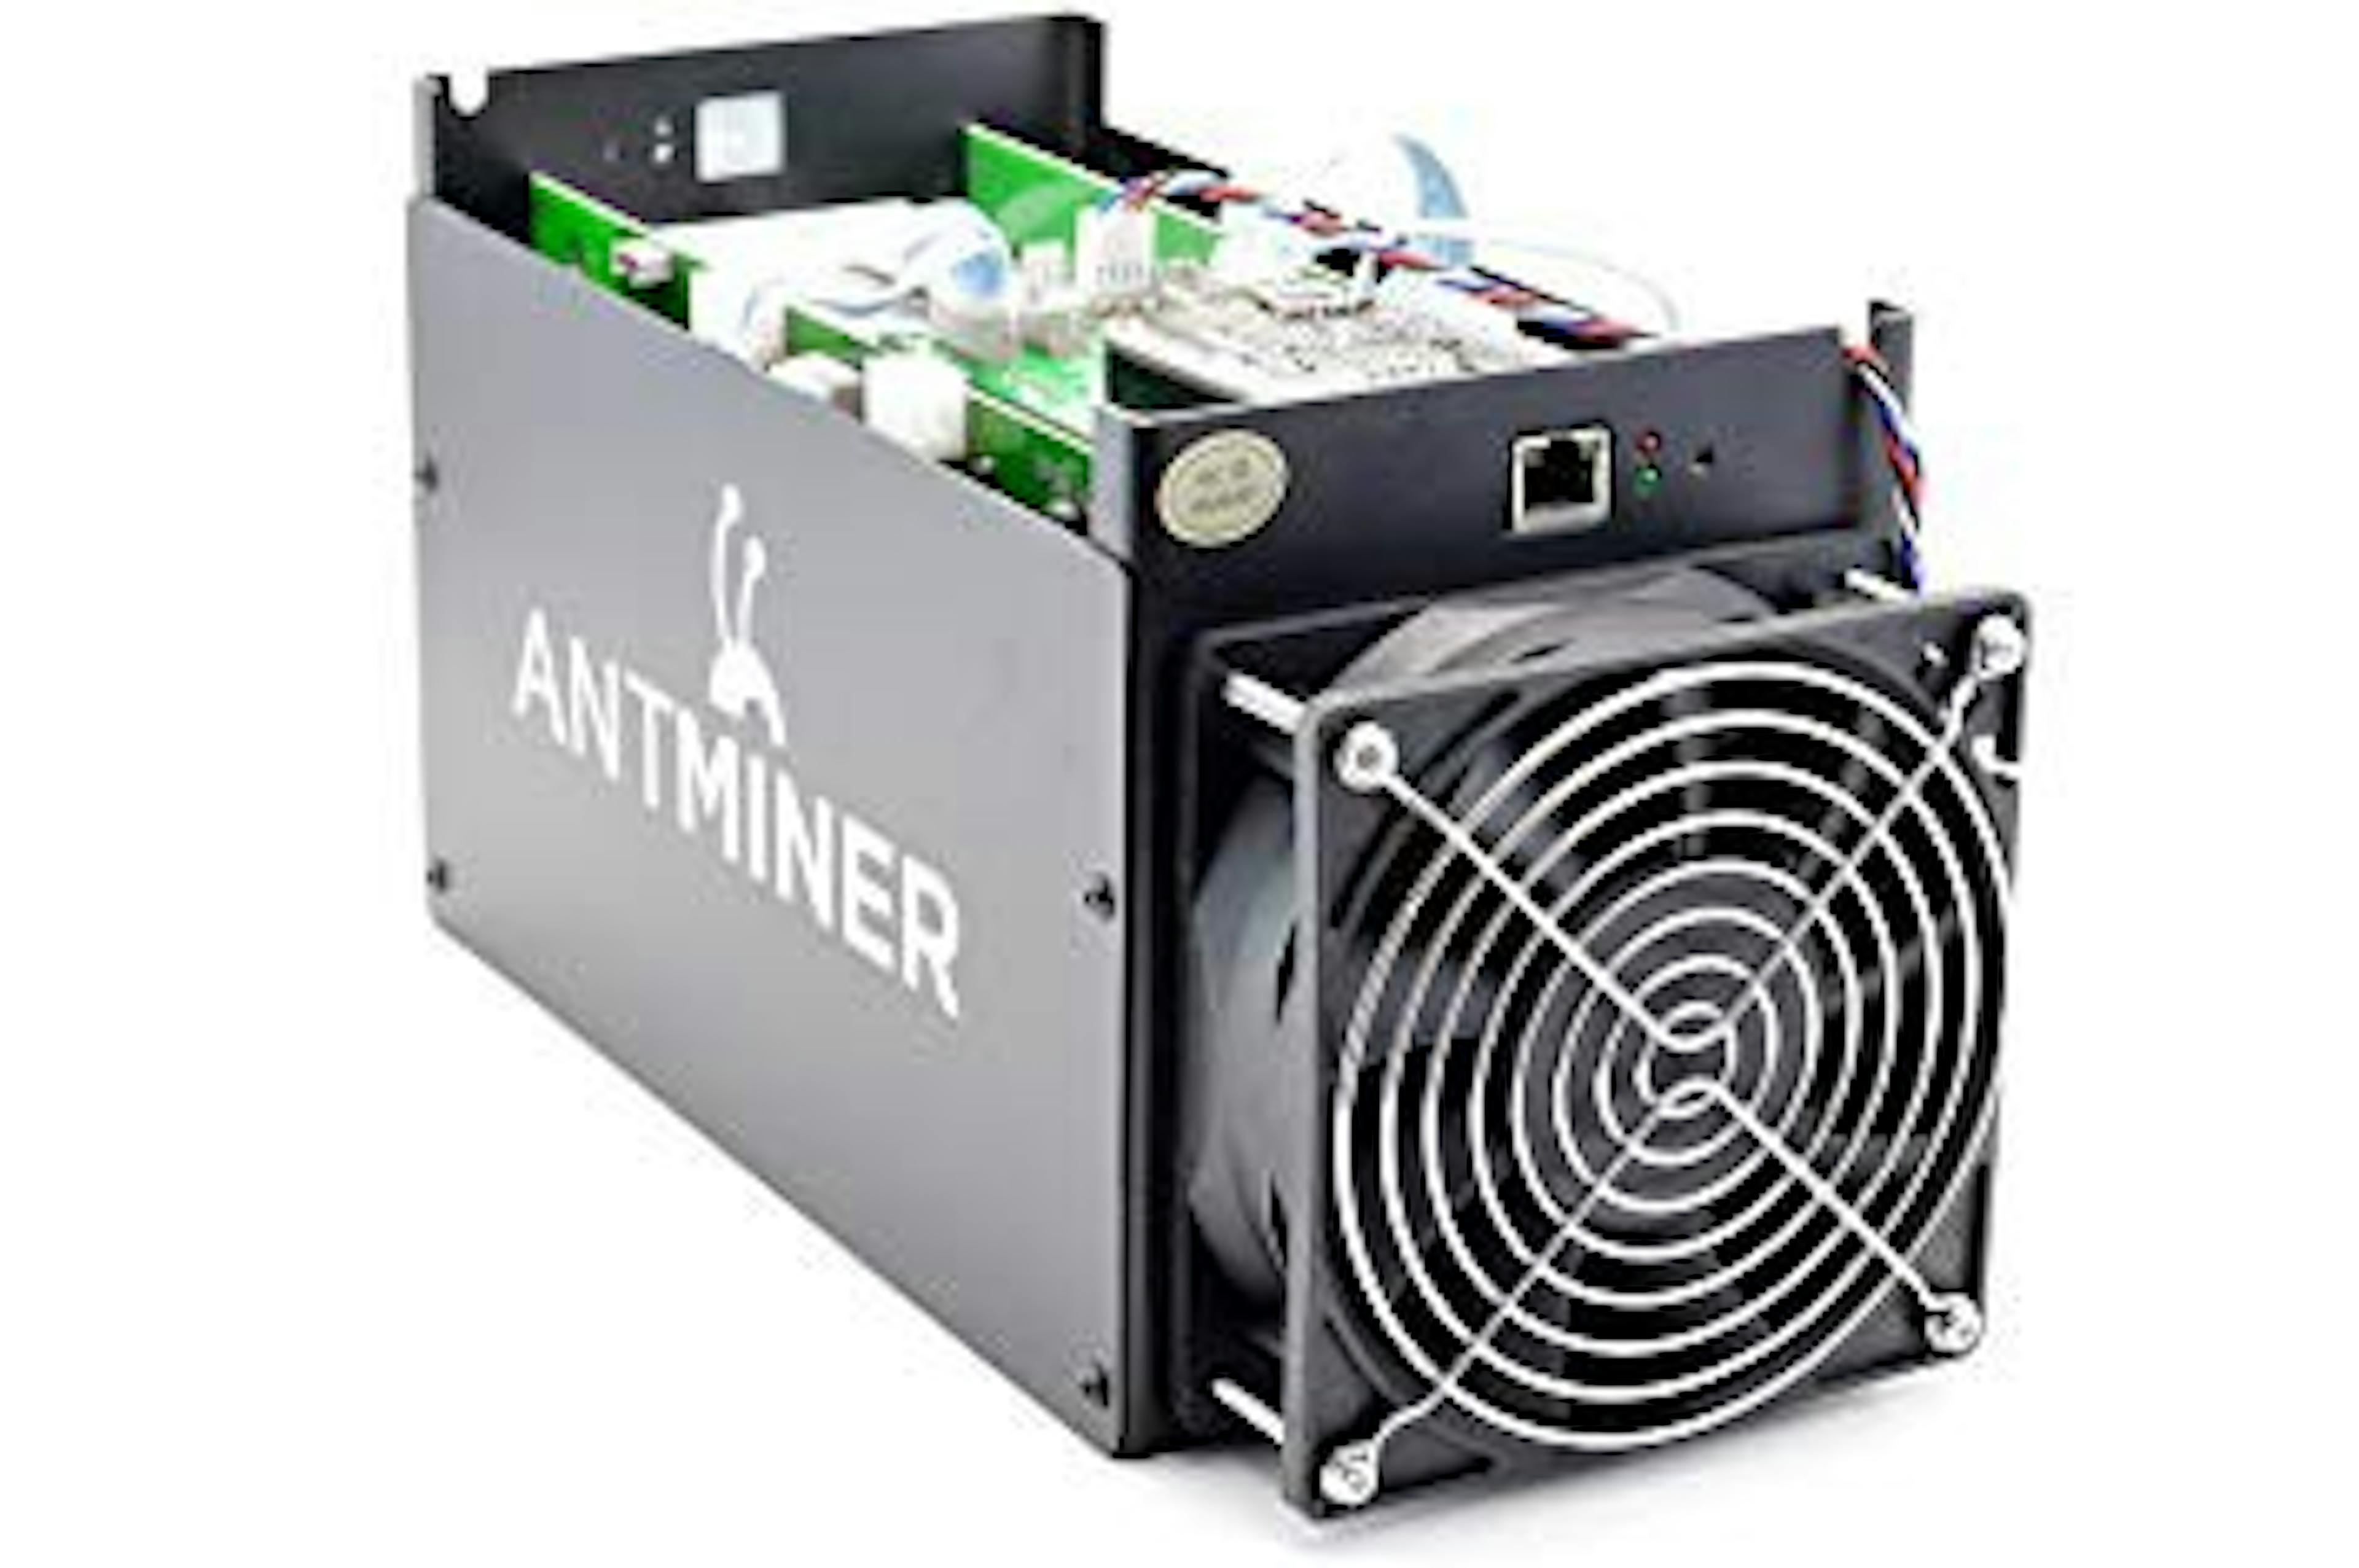 /summary-of-bitmain-lawsuit-ed3a3412c965 feature image